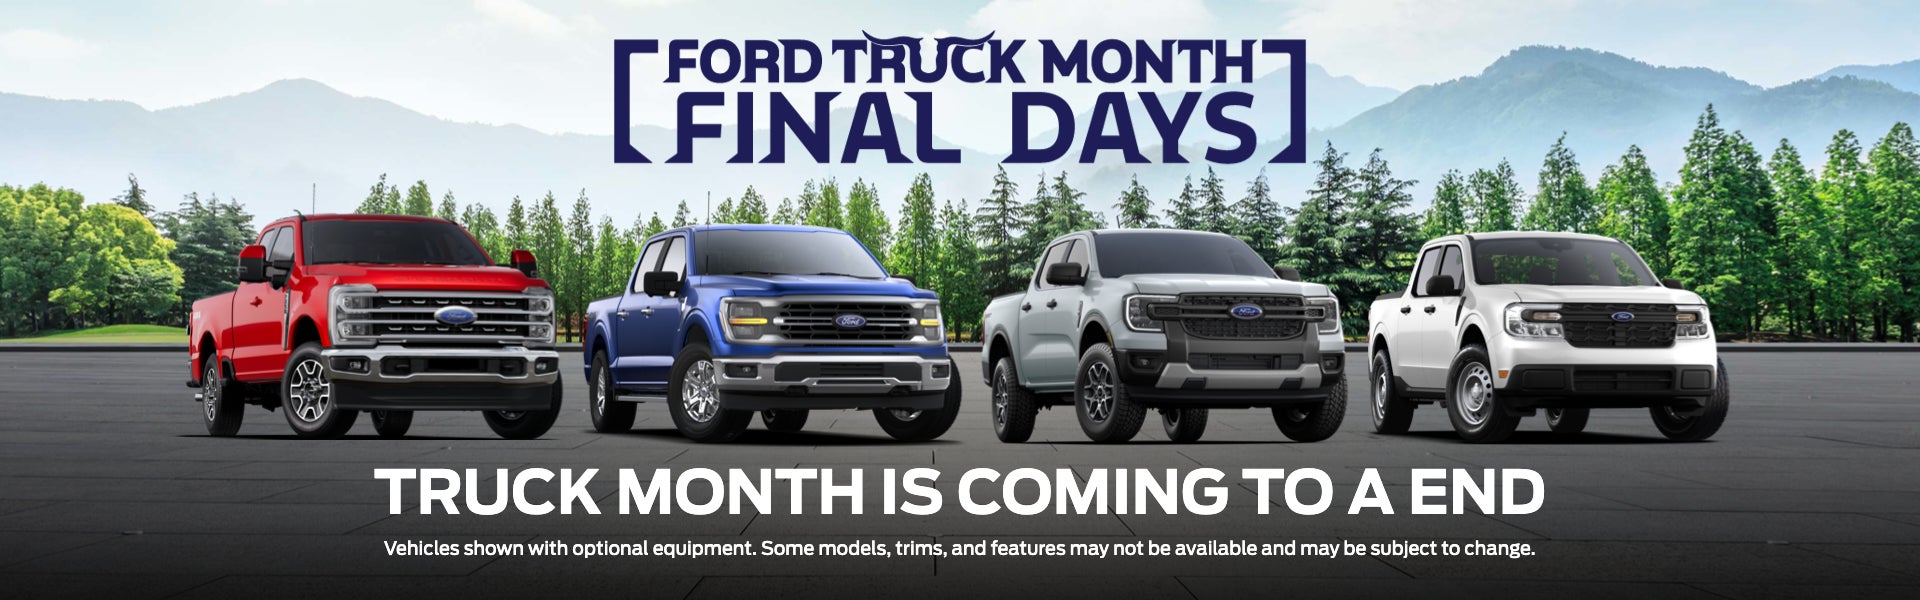 FORD TRUCK MONTH FINAL DAYS